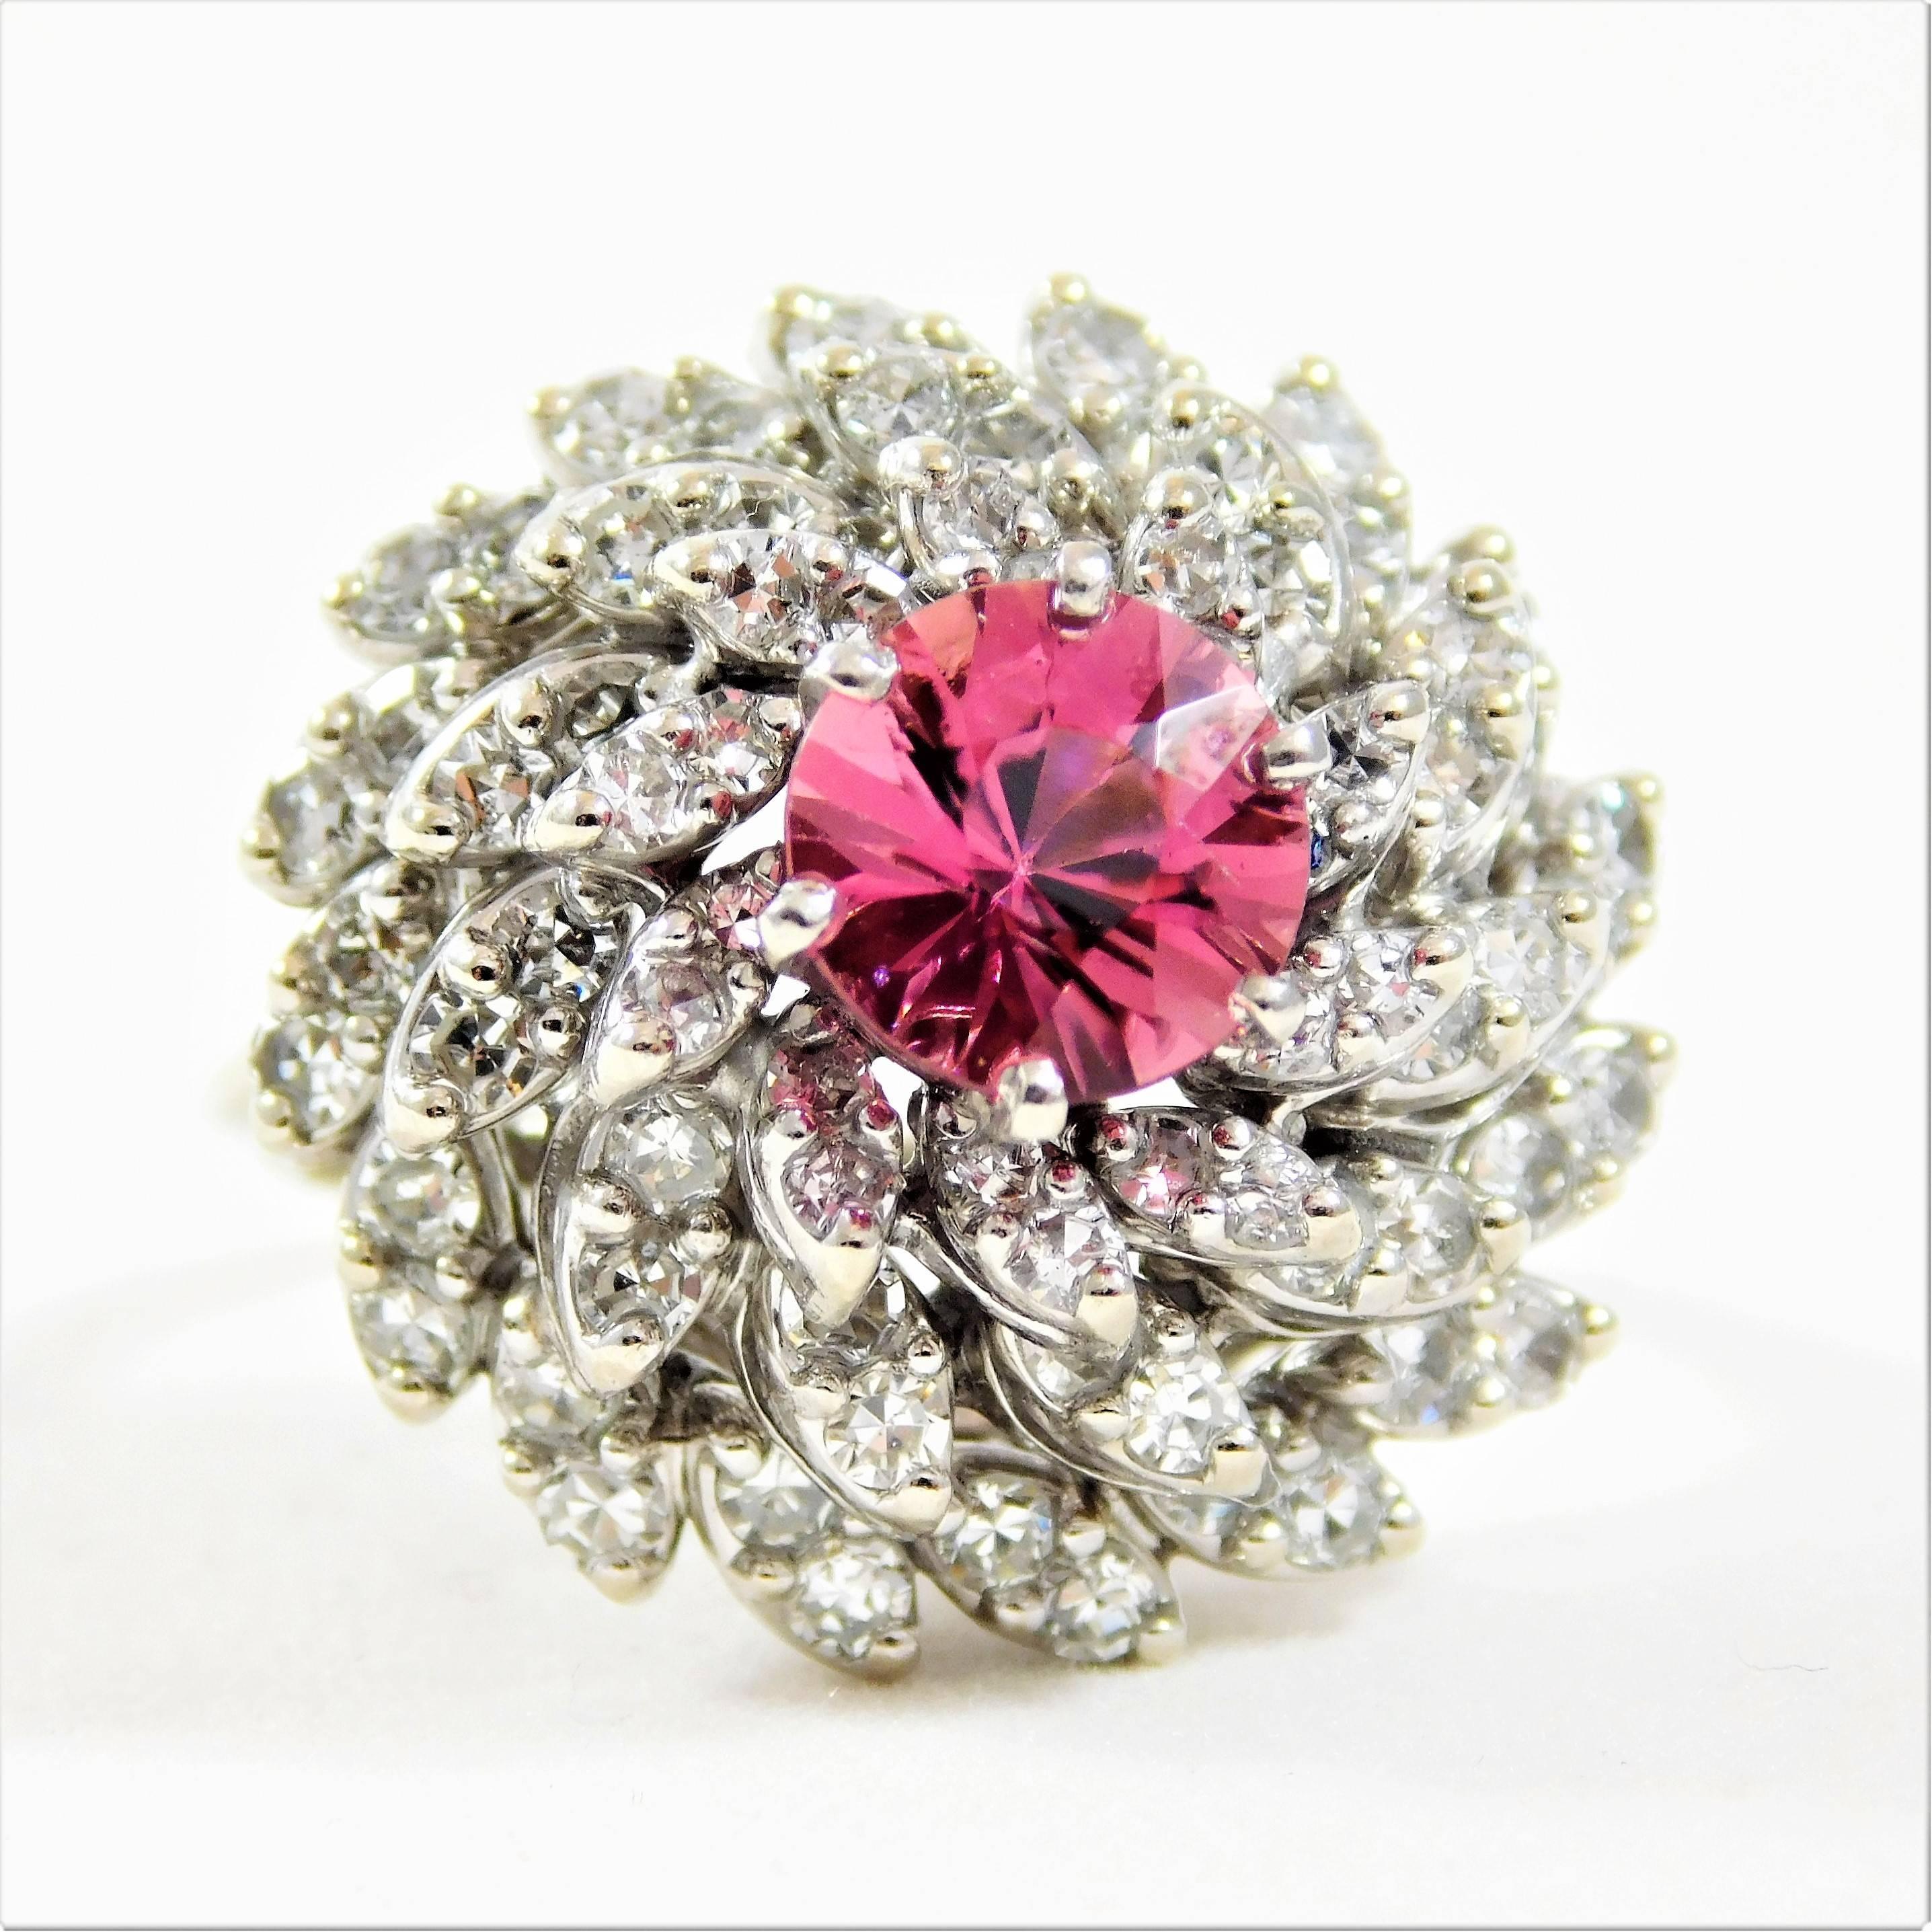 An estate piece. These astonishing ladies’ ring is made of solid 14k white gold.  It features a captivating 2.25ct round brilliant-cut pink sapphire as its center stone. The Pink Sapphire is a miracle of mother nature and is traditionally more